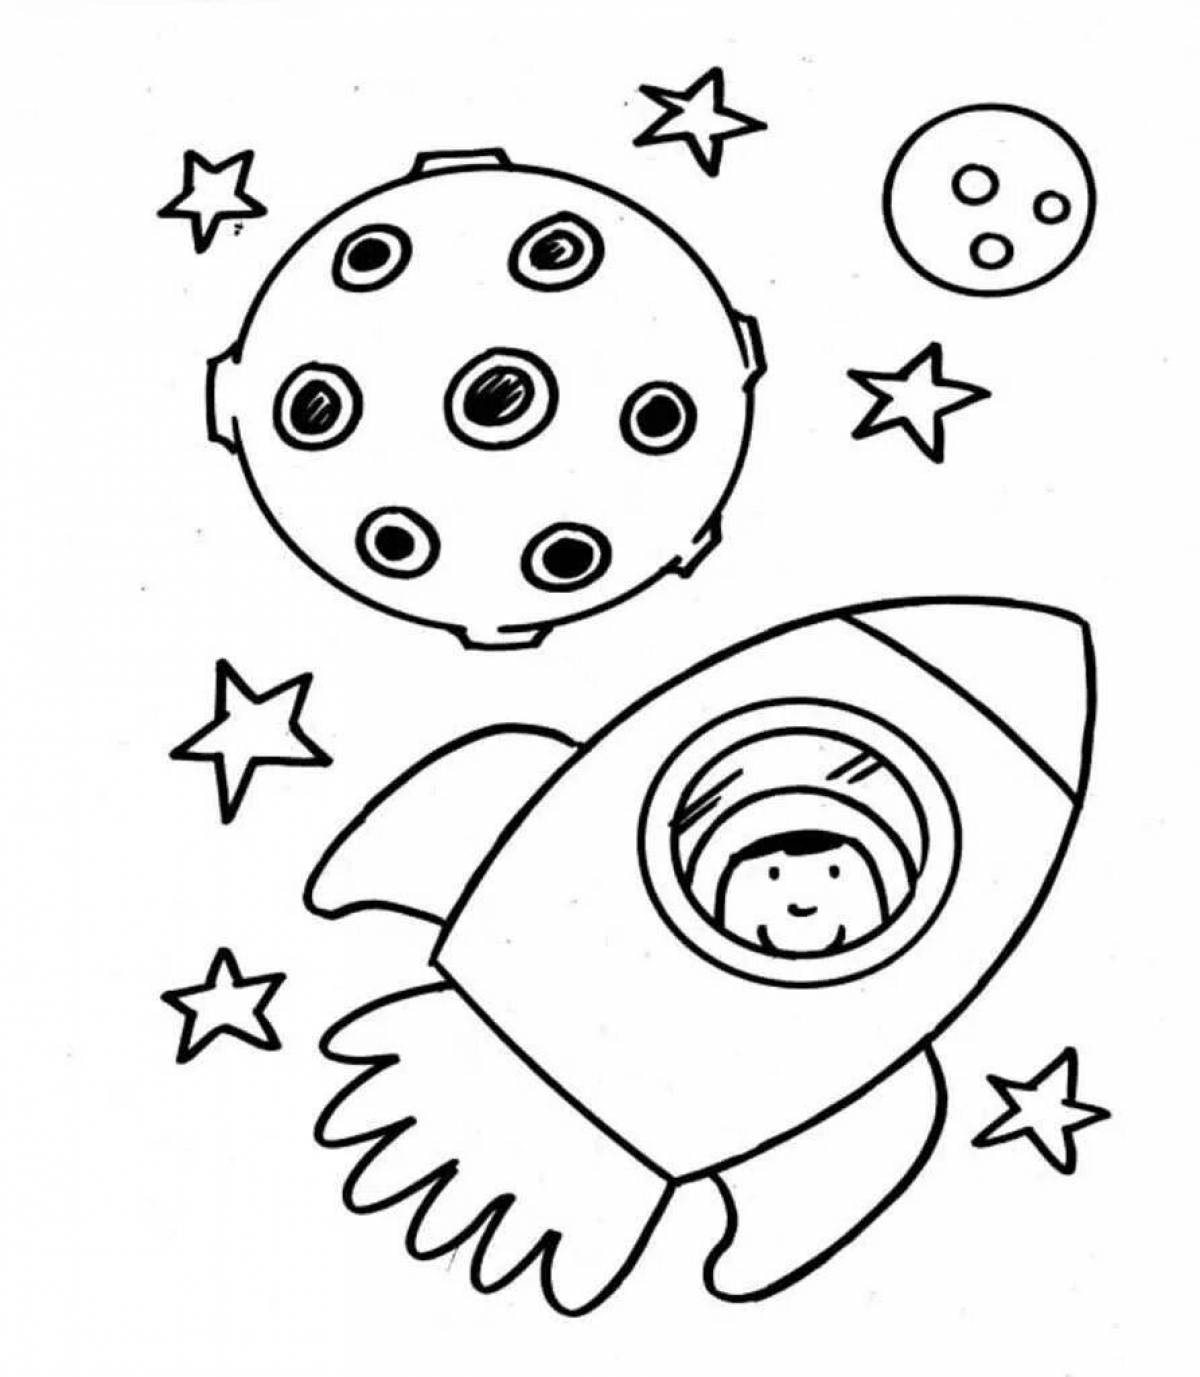 Luminous space coloring book for boys